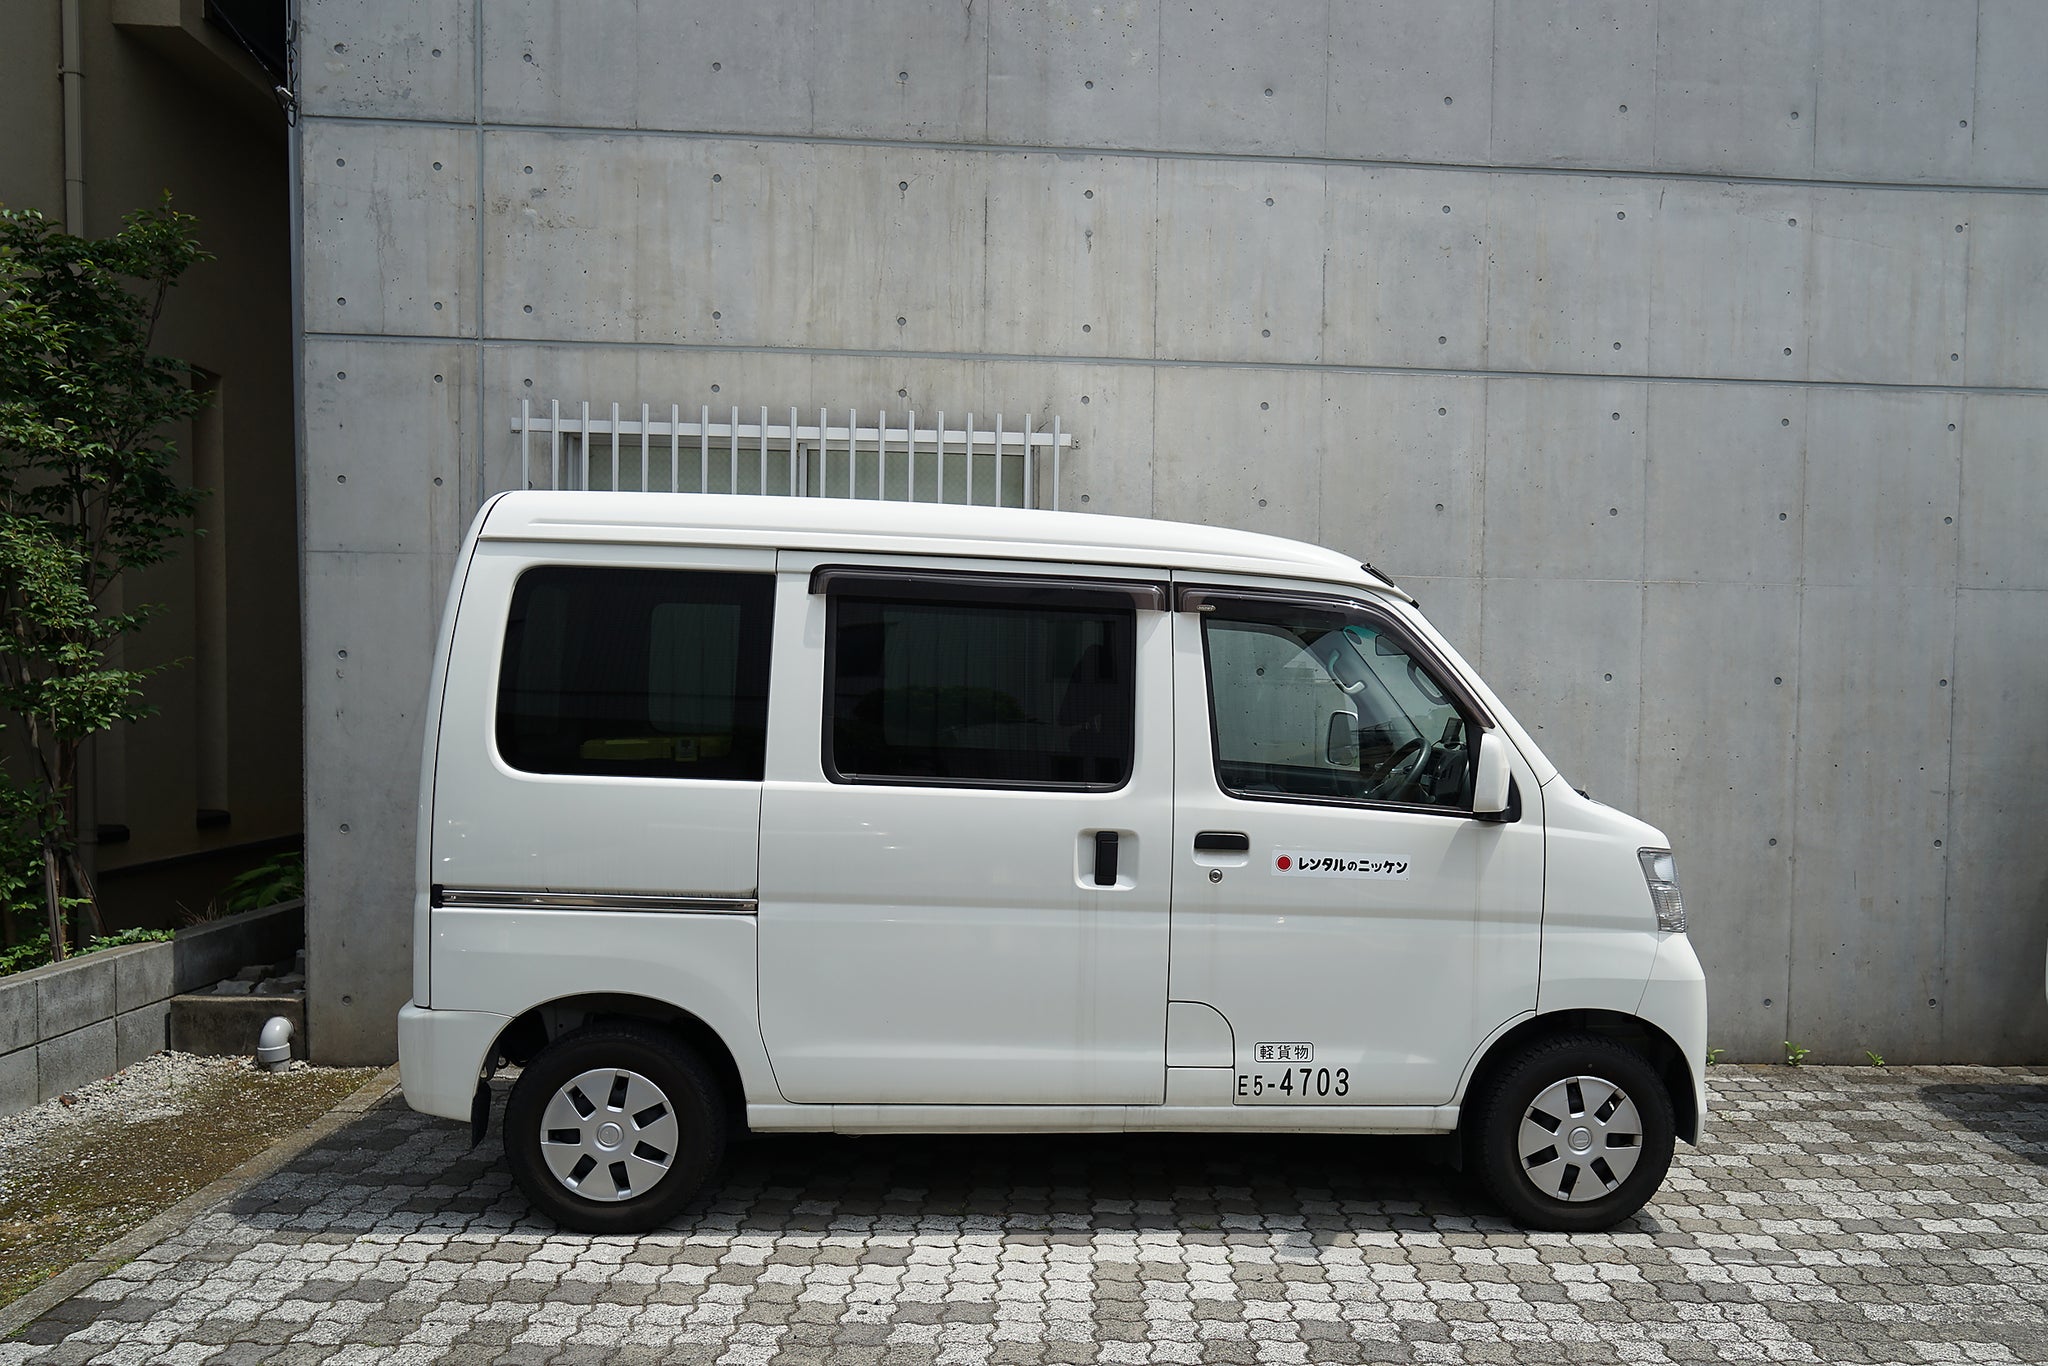 Square cars of Japan